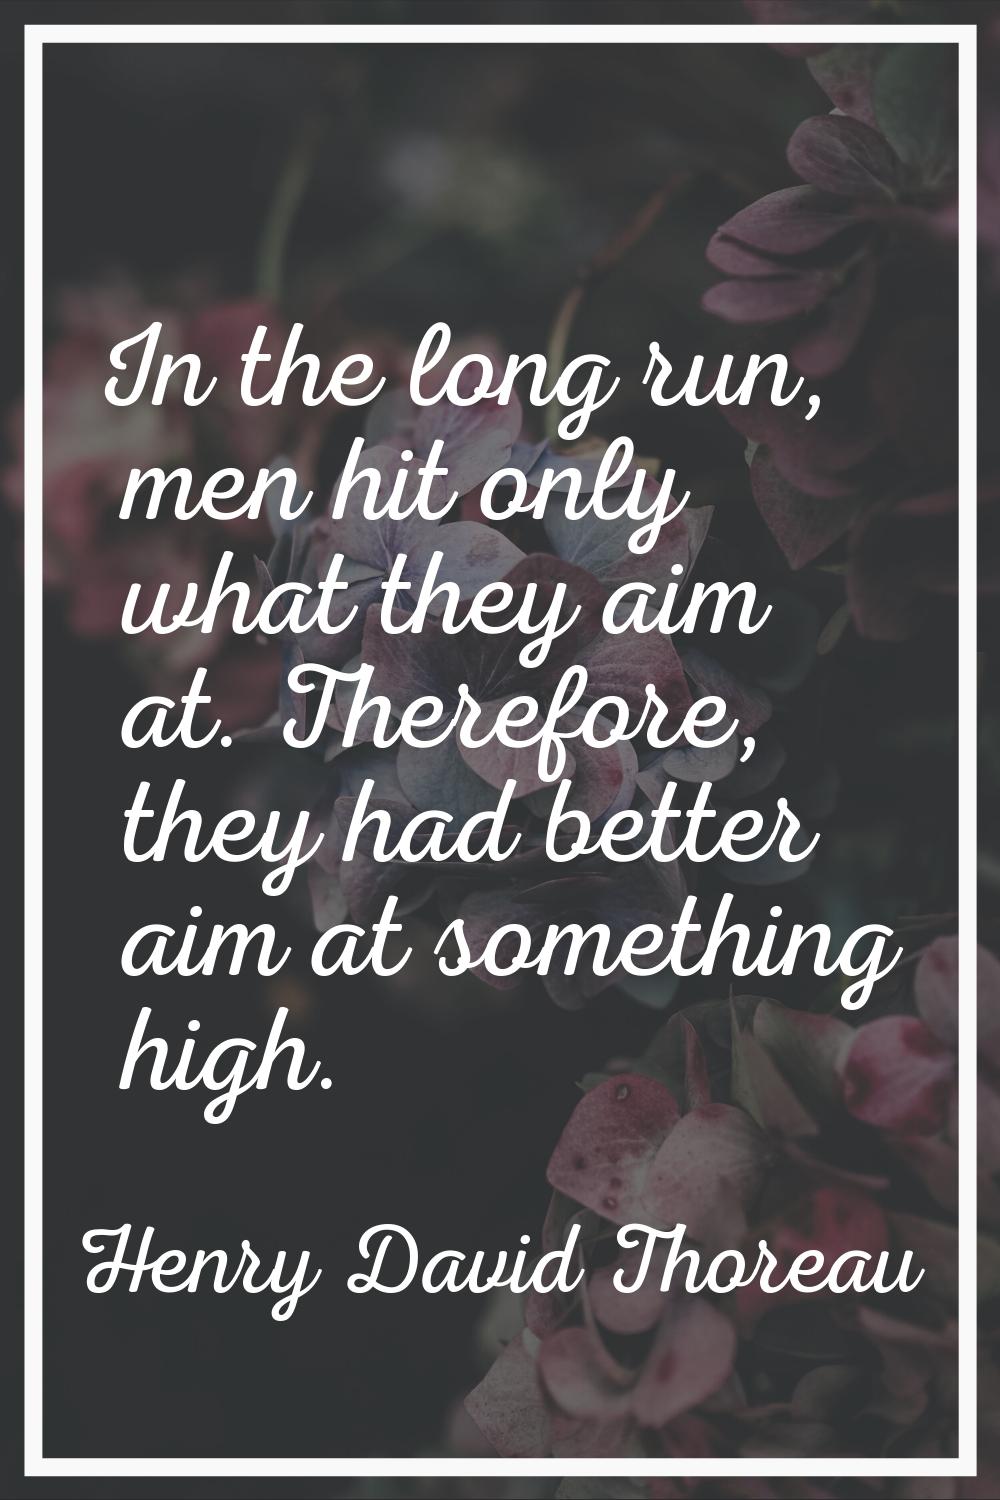 In the long run, men hit only what they aim at. Therefore, they had better aim at something high.